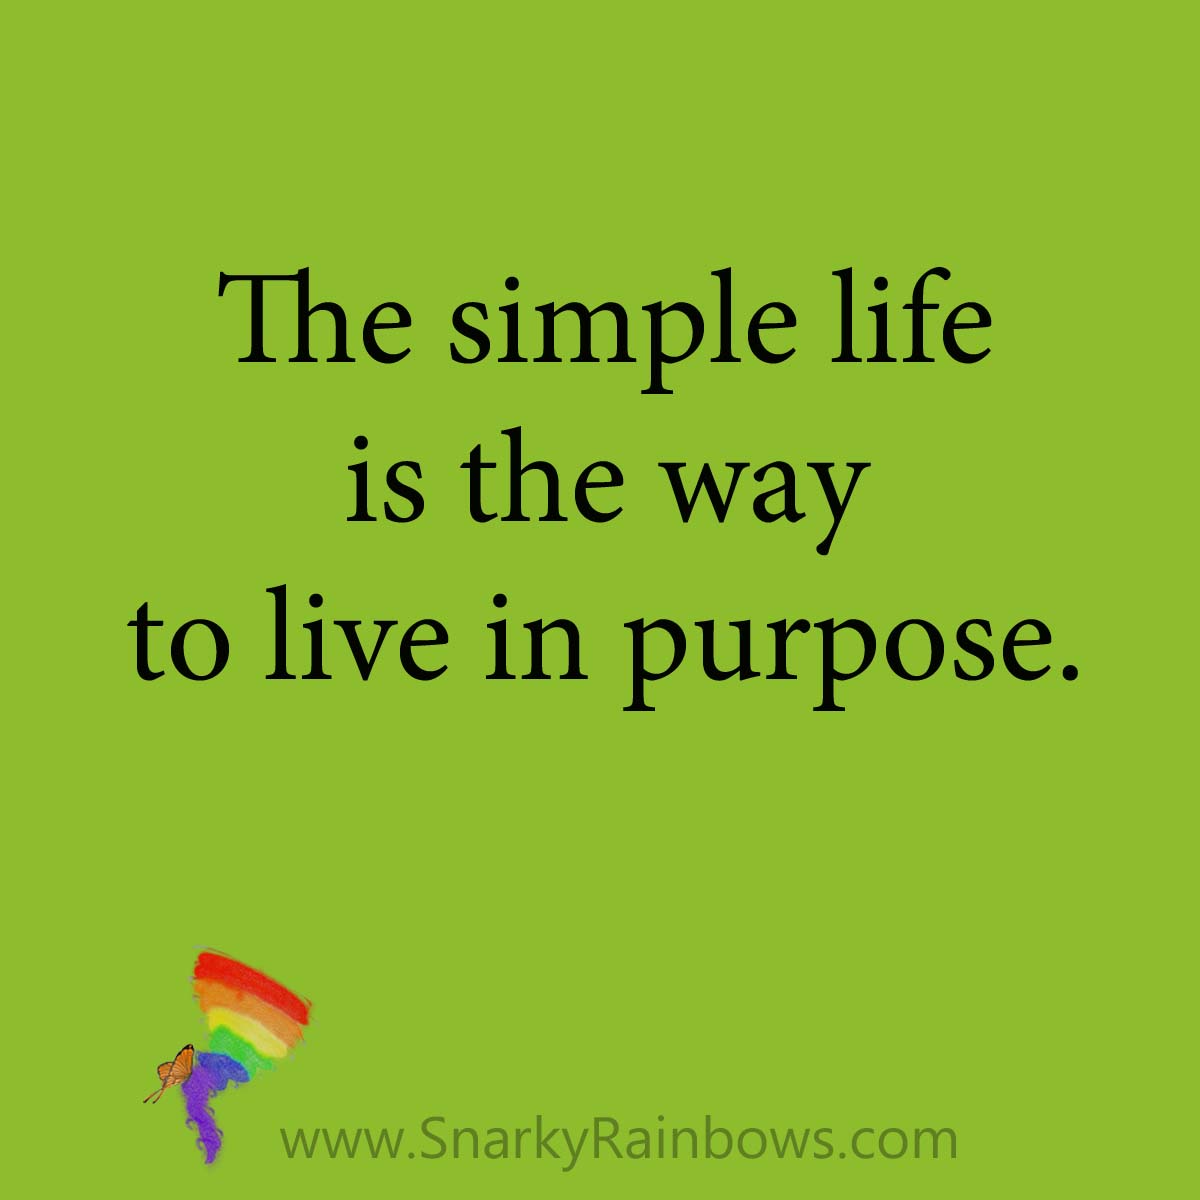 quote - the simple life